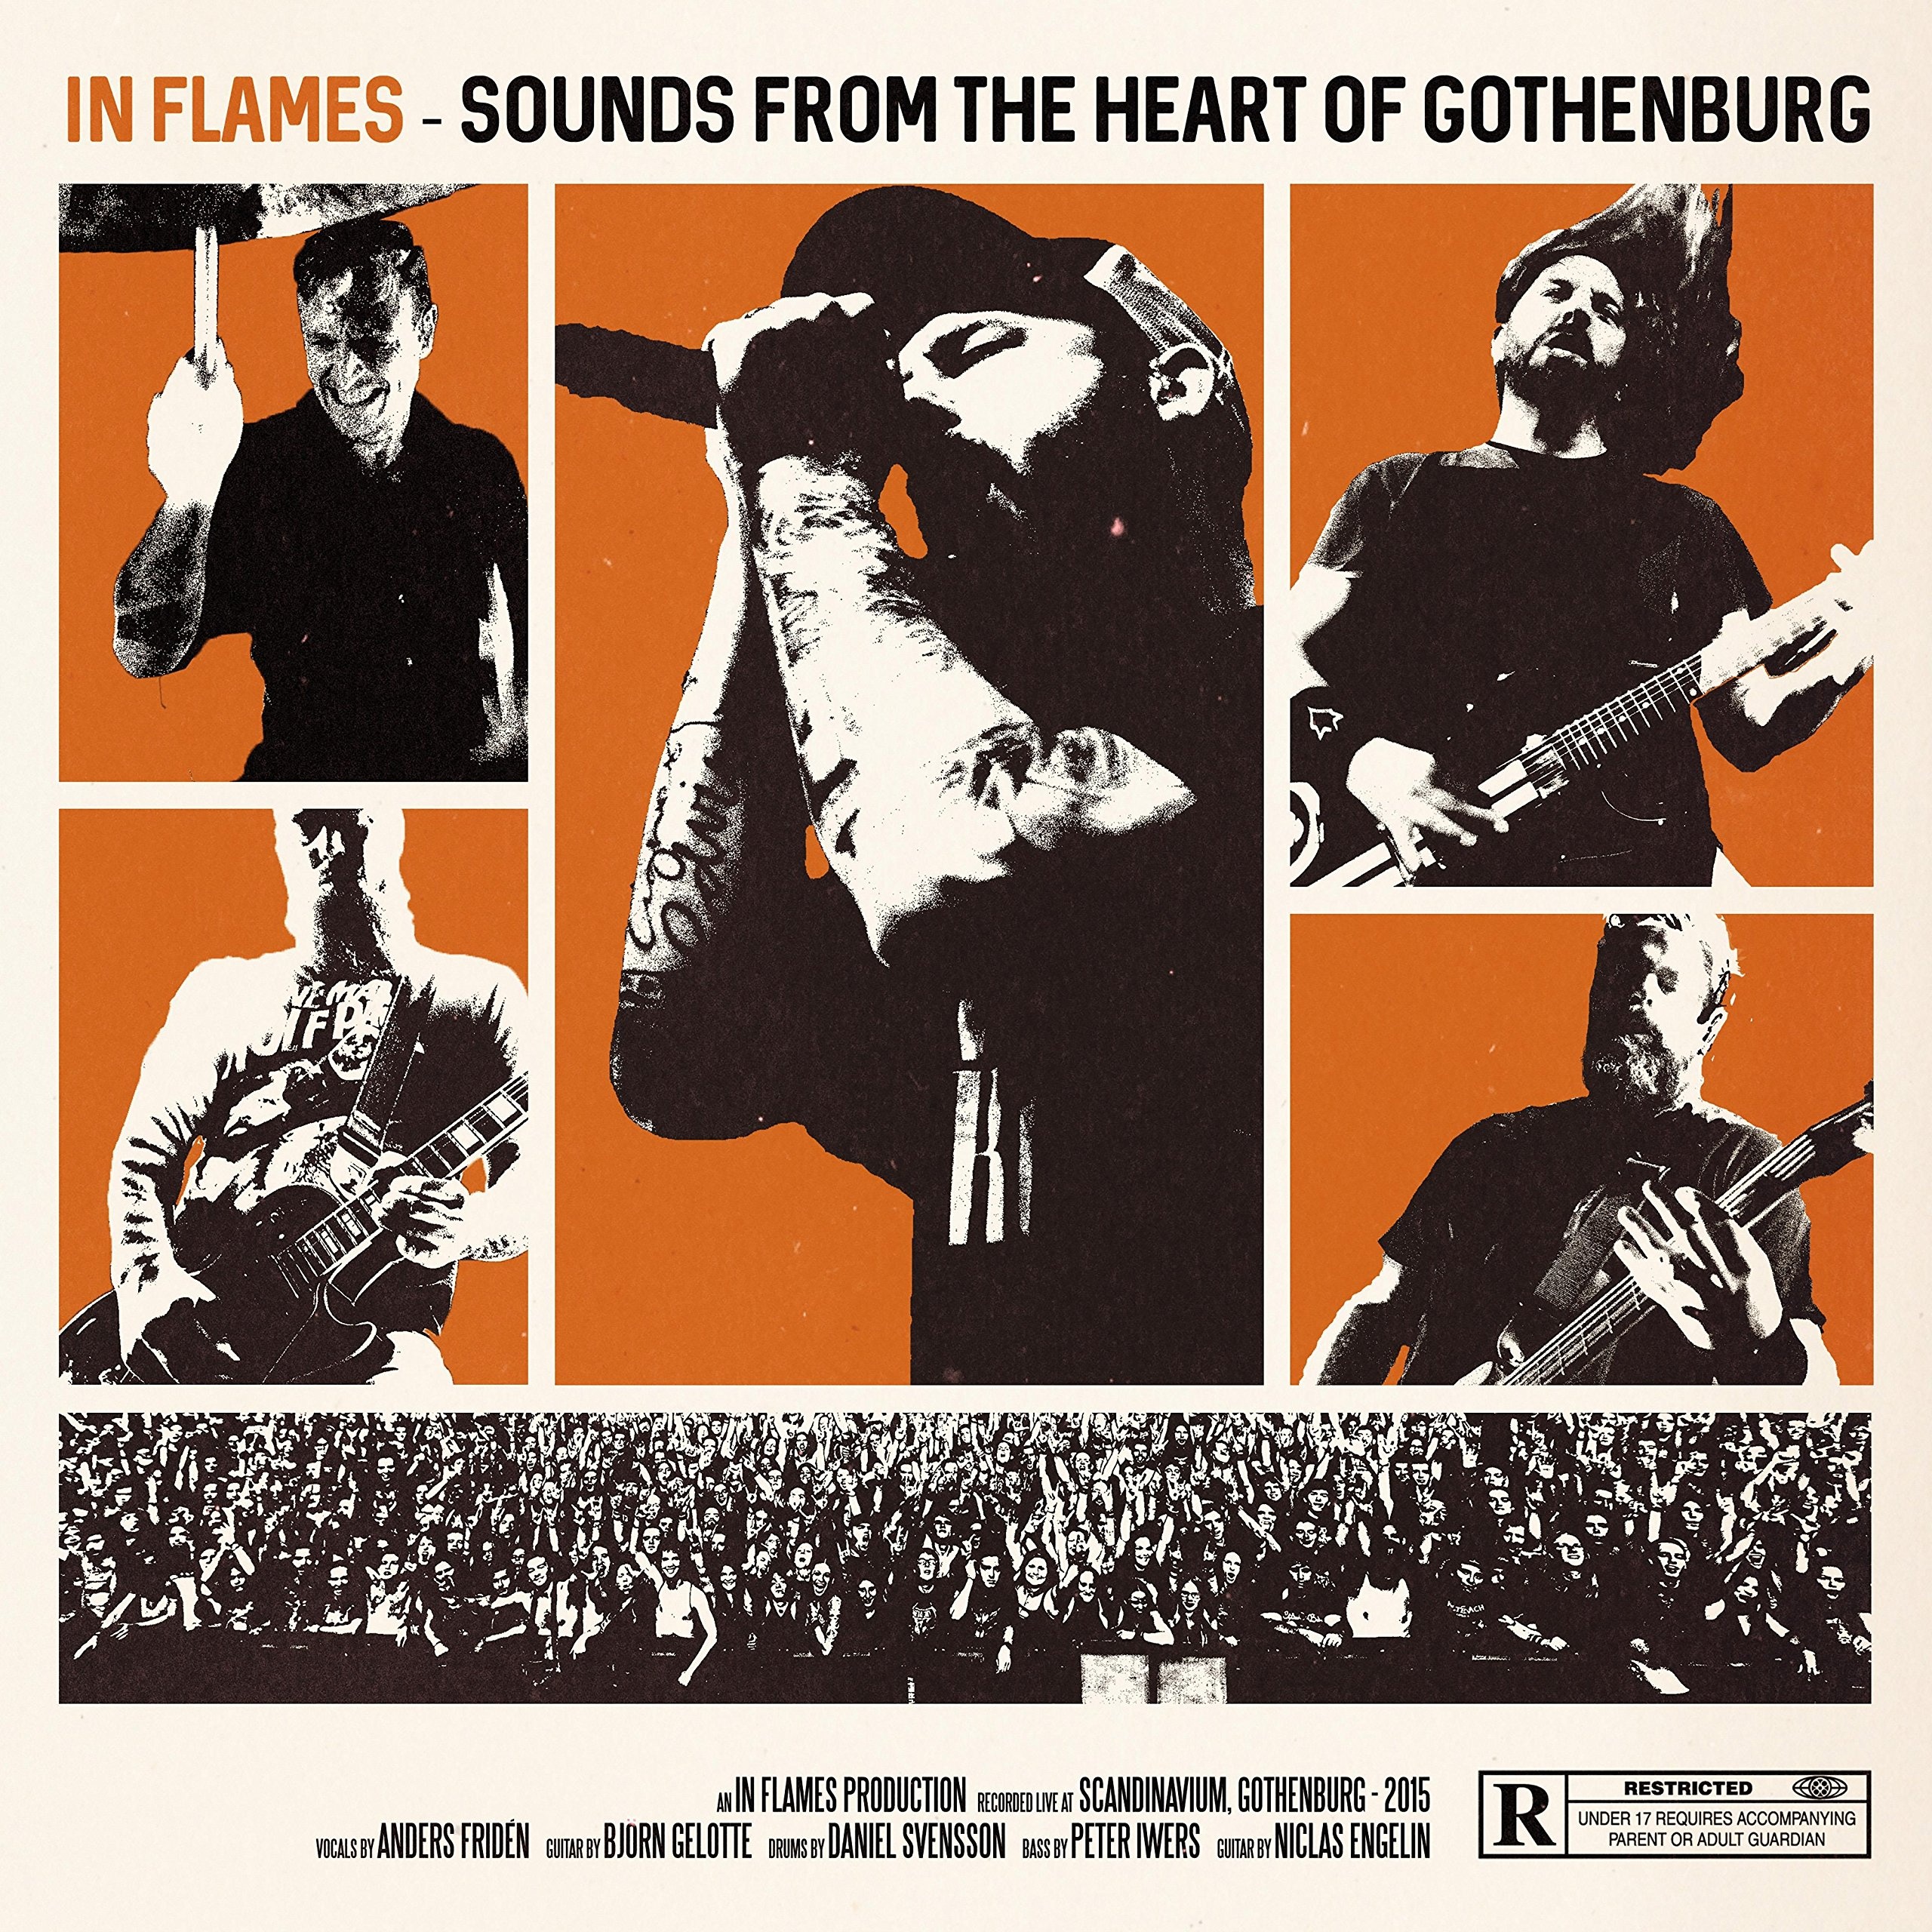 Sounds From The Heart Of Gothenburg (BluRay + 2 CDs) [Blu-ray]